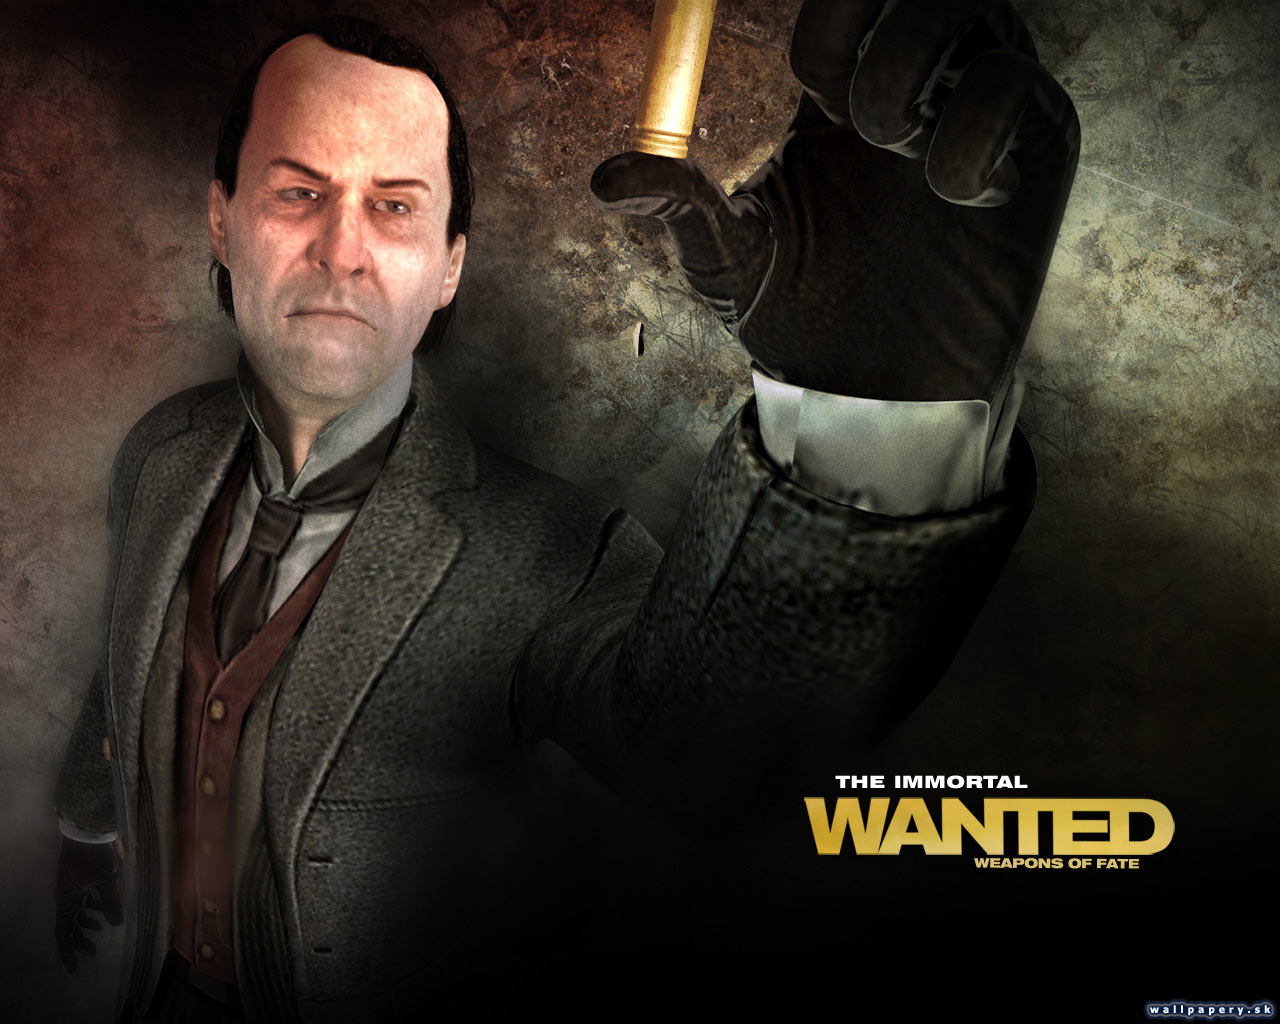 Wanted: Weapons of Fate - wallpaper 25